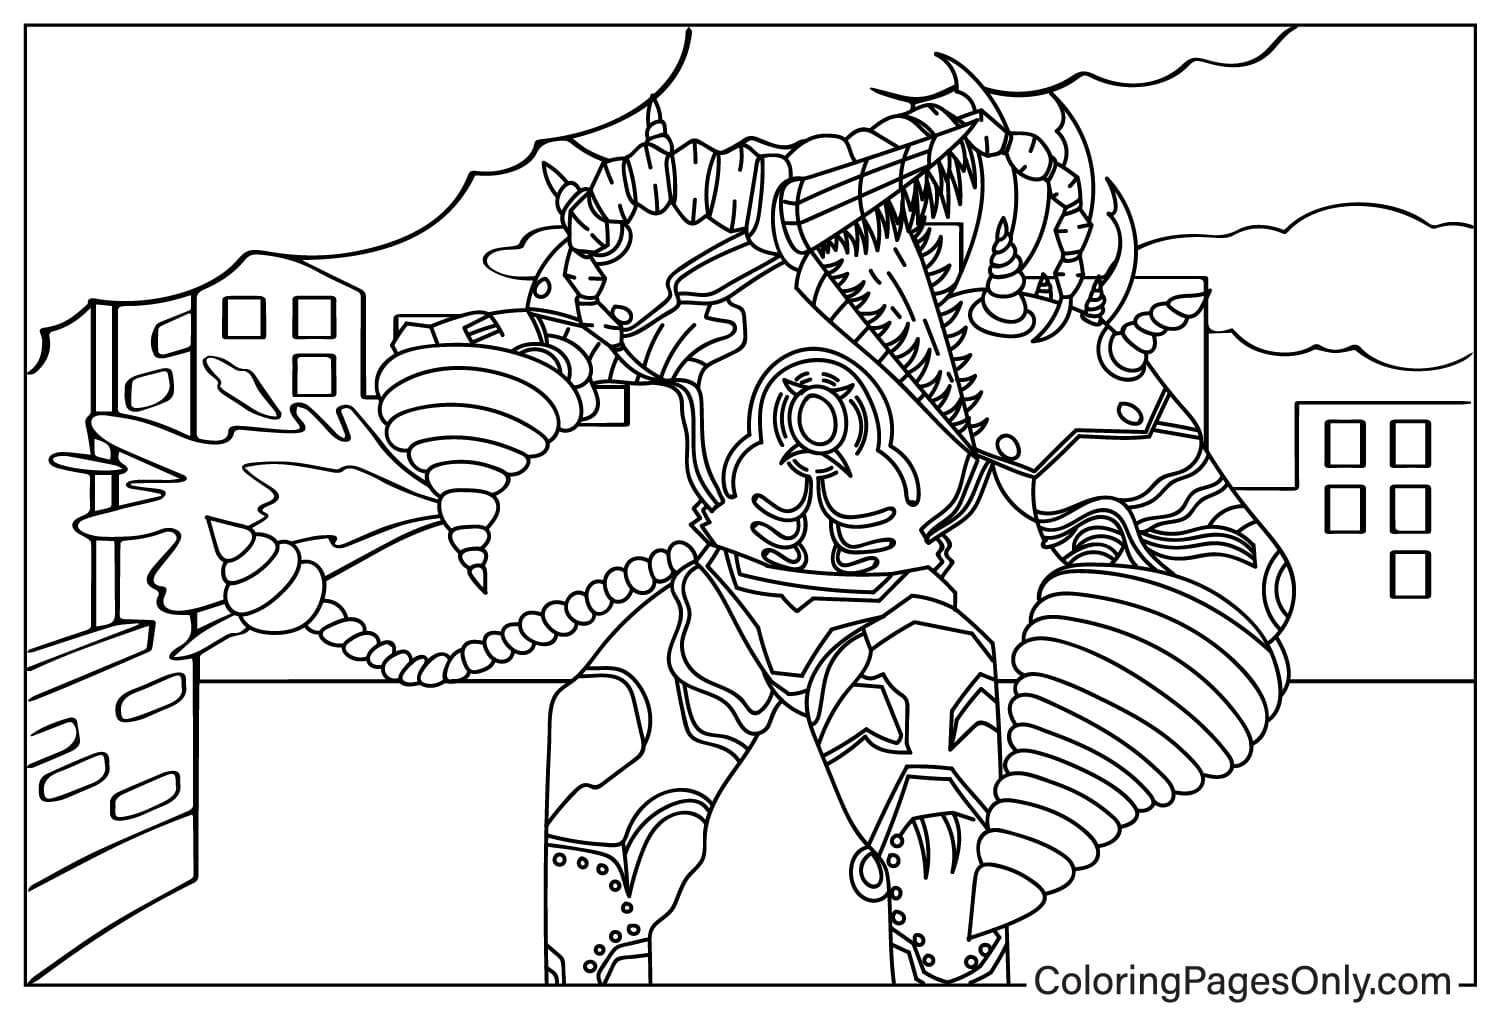 Upgraded Titan Drill Man Angry Coloring Page from Upgraded Titan Drill Man